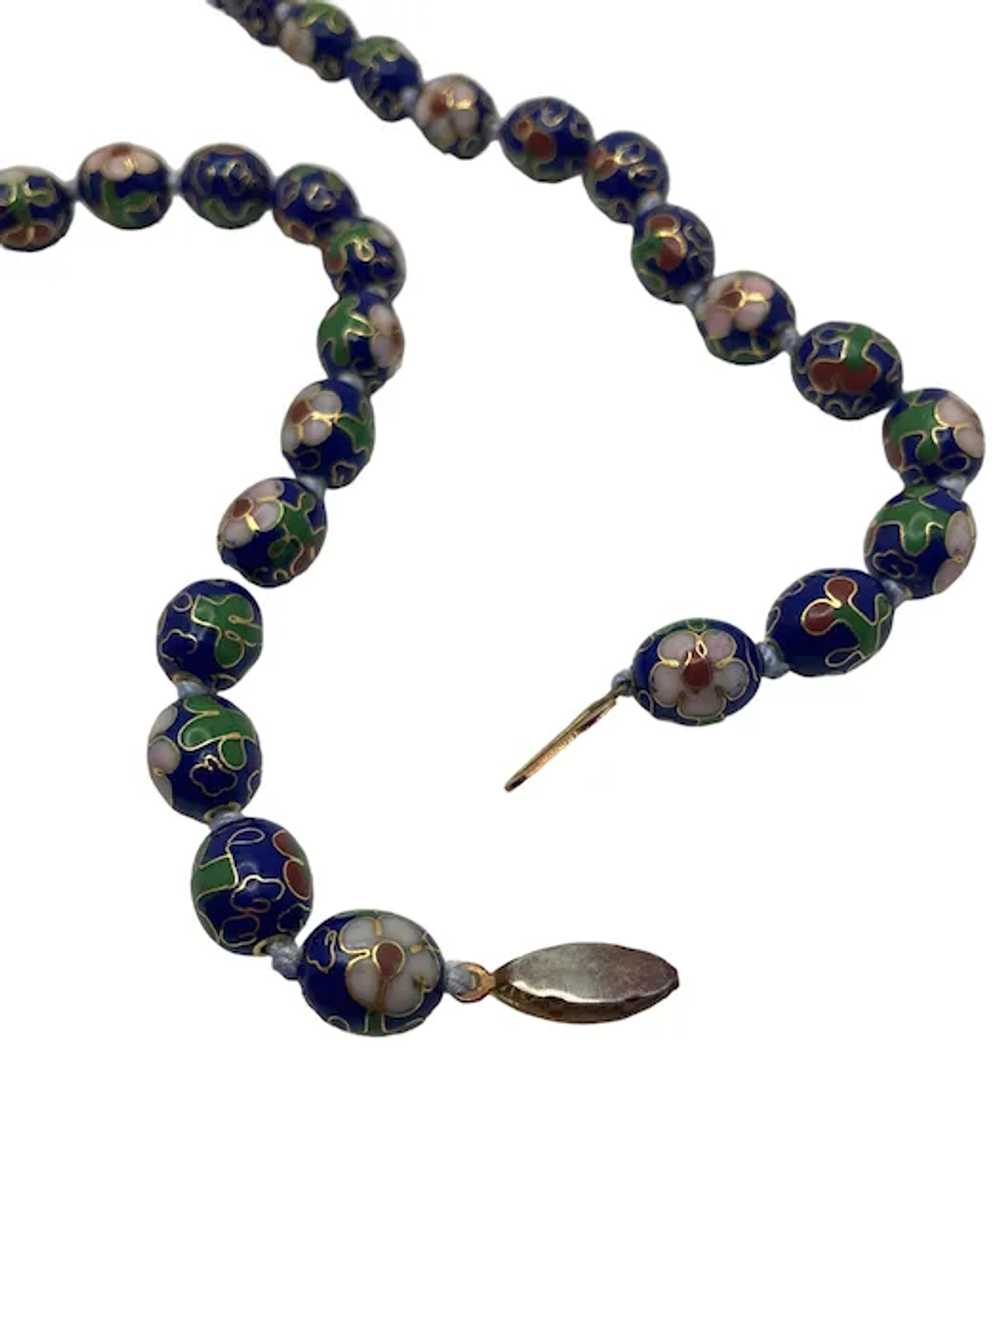 Vintage Chinese Cloisonne Oval Bead Necklace - image 8